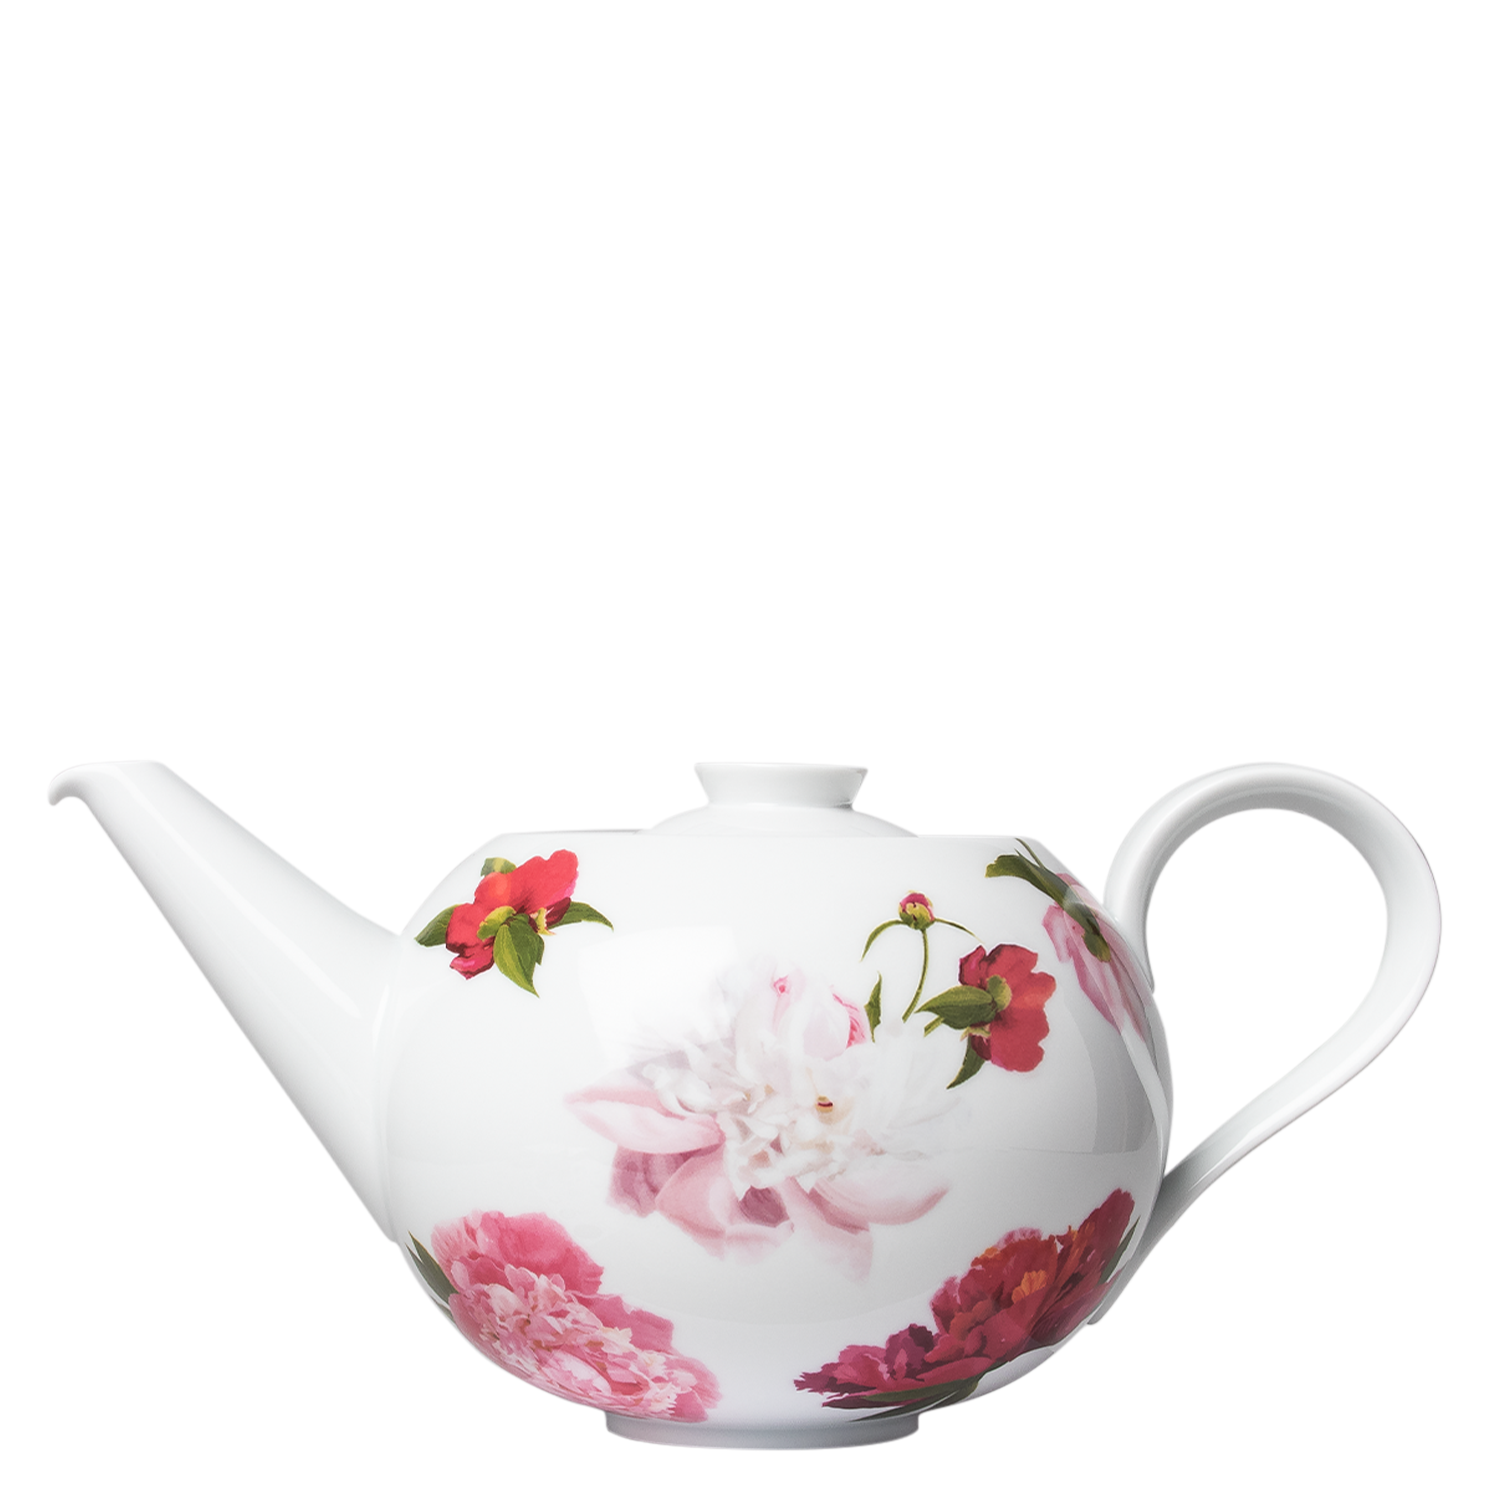 Sieger Teapot with Tea Strainer by Furstenberg My China Collection! Paraiso 1.45 liter